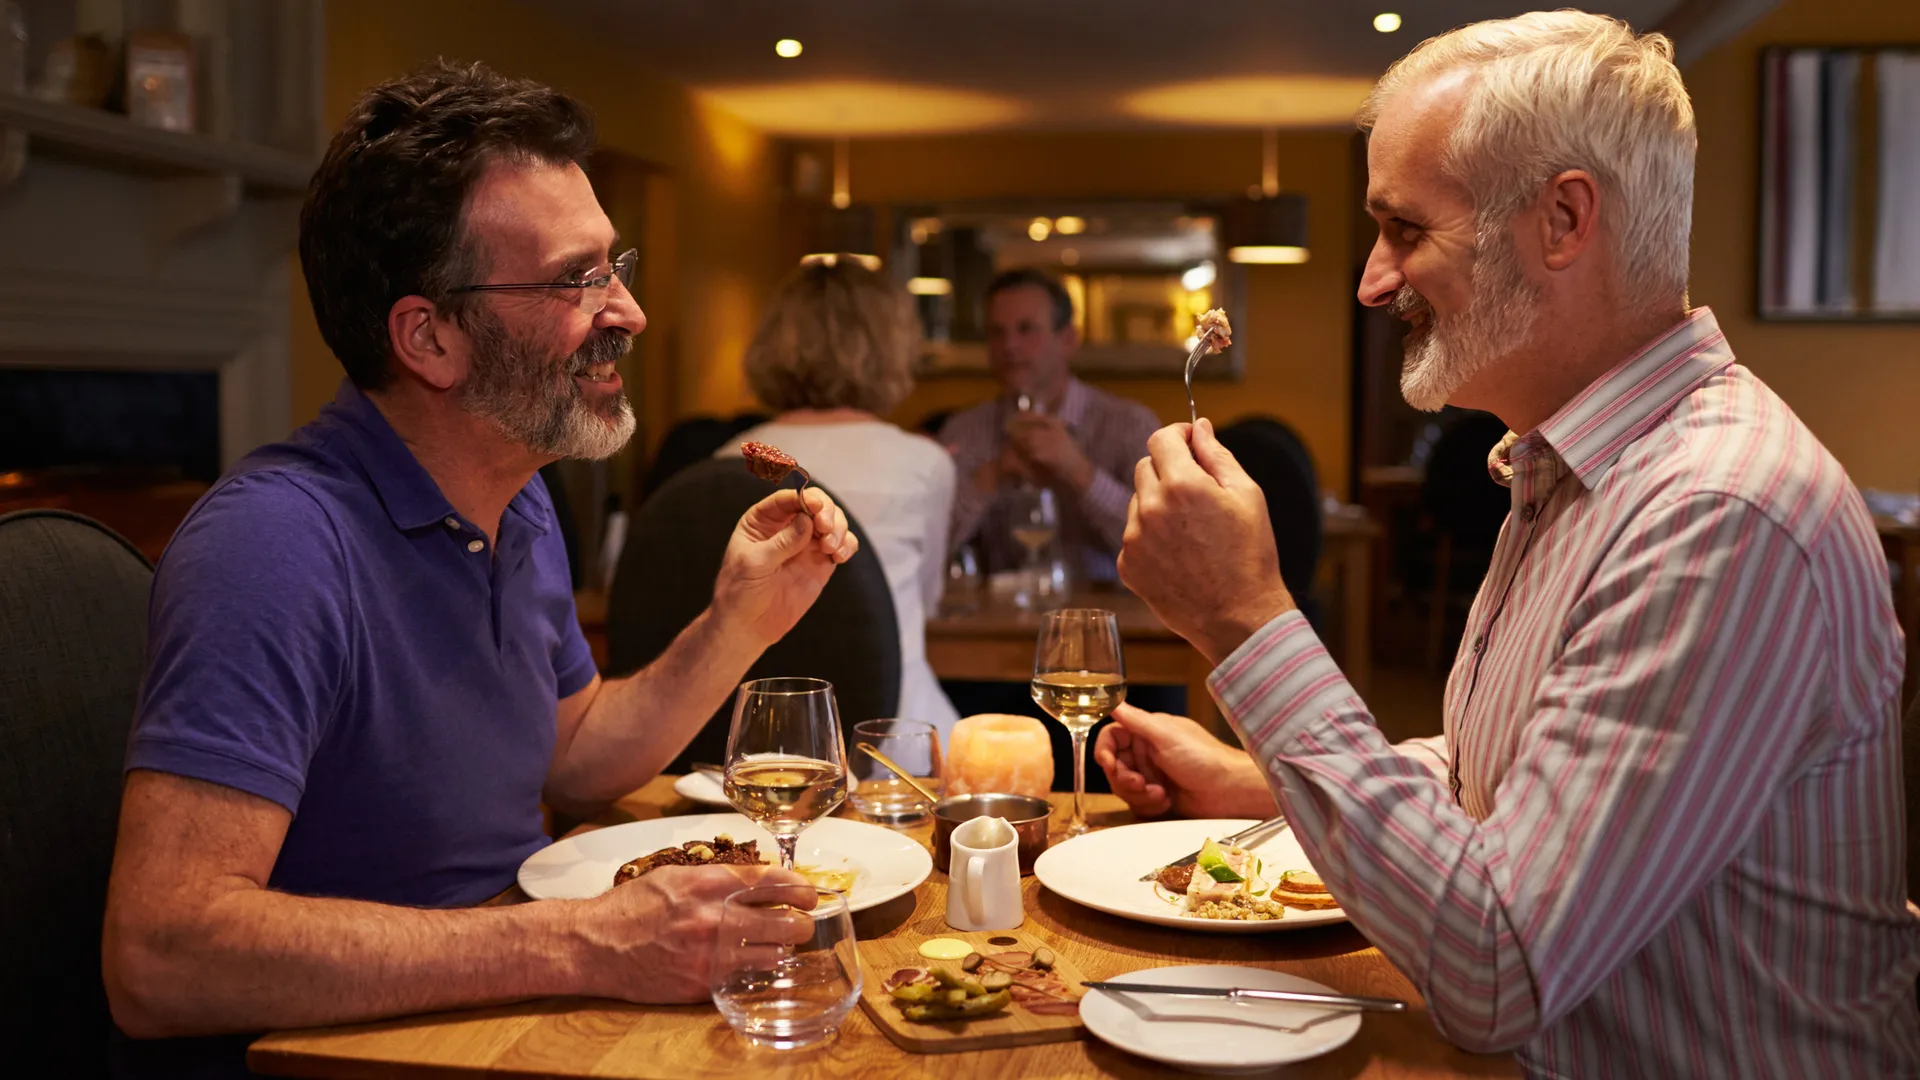 Middle aged male couple eating evening meal in a restaurant.